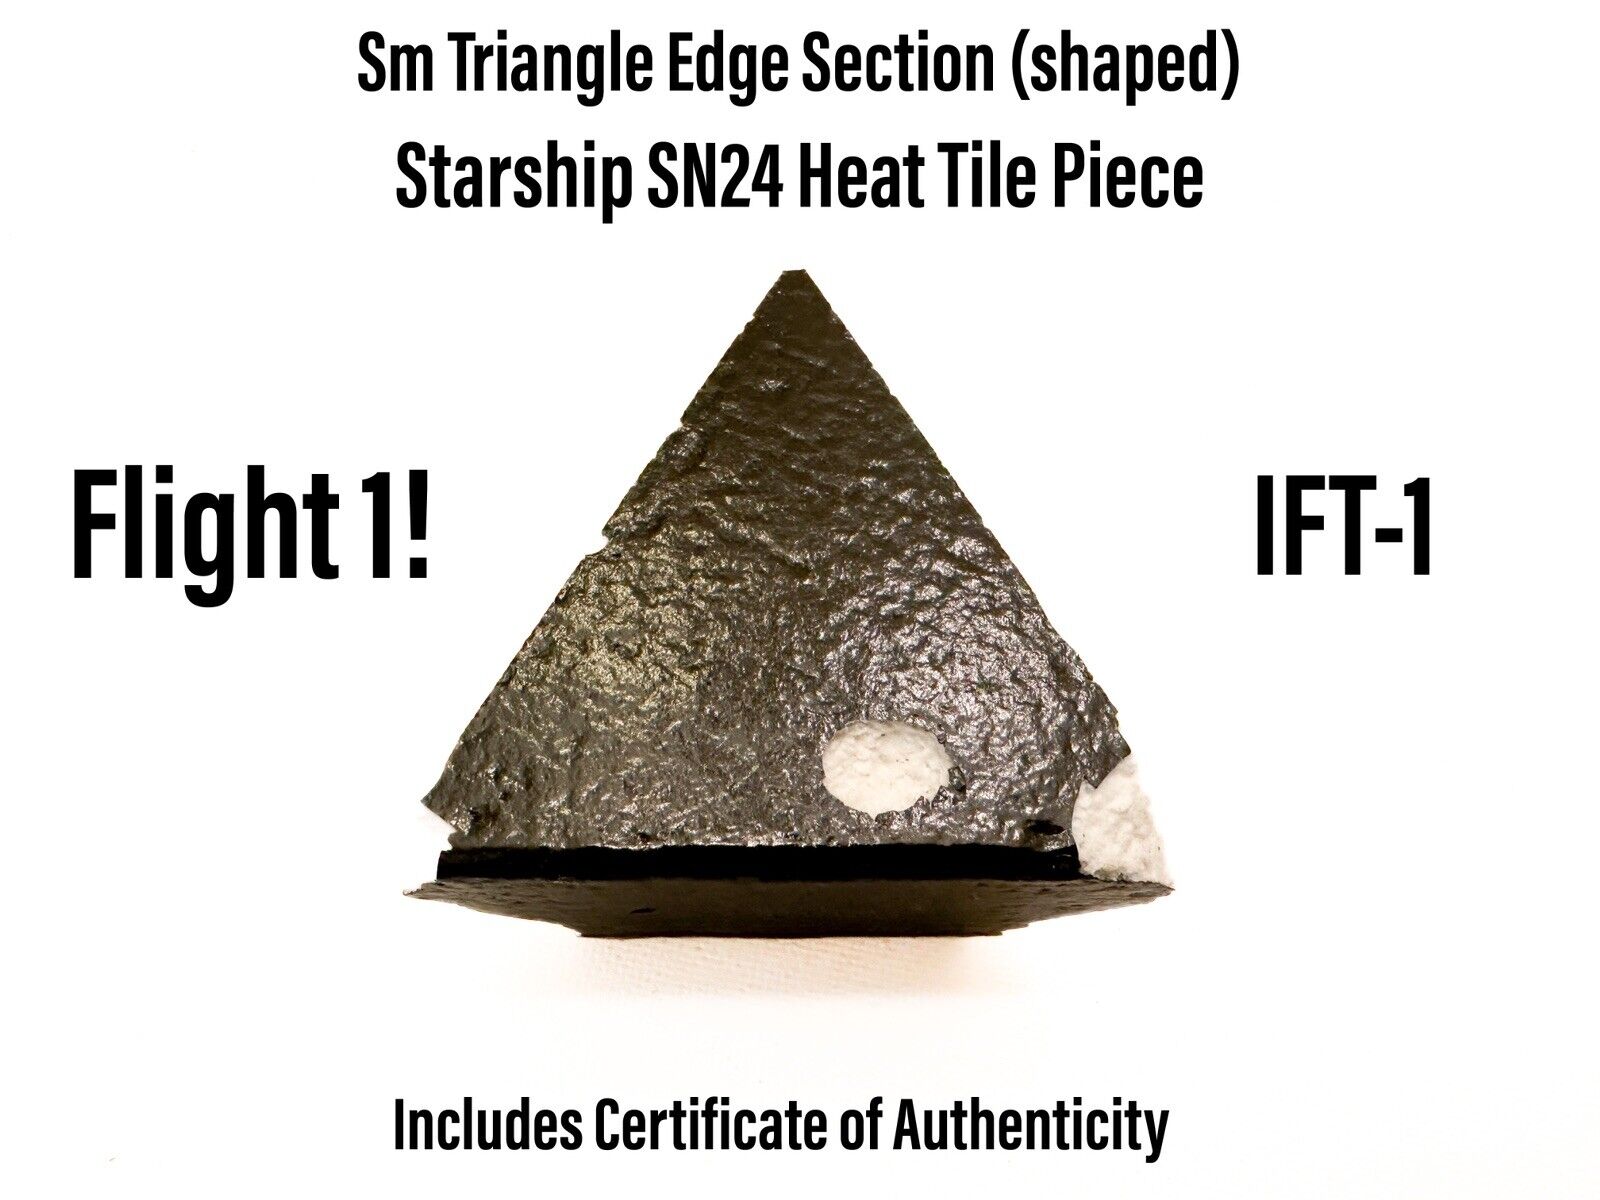 SpaceX Starship SN24 S24 B7 Sm Heat Shield Tile - Triangle Edge Section (shaped)